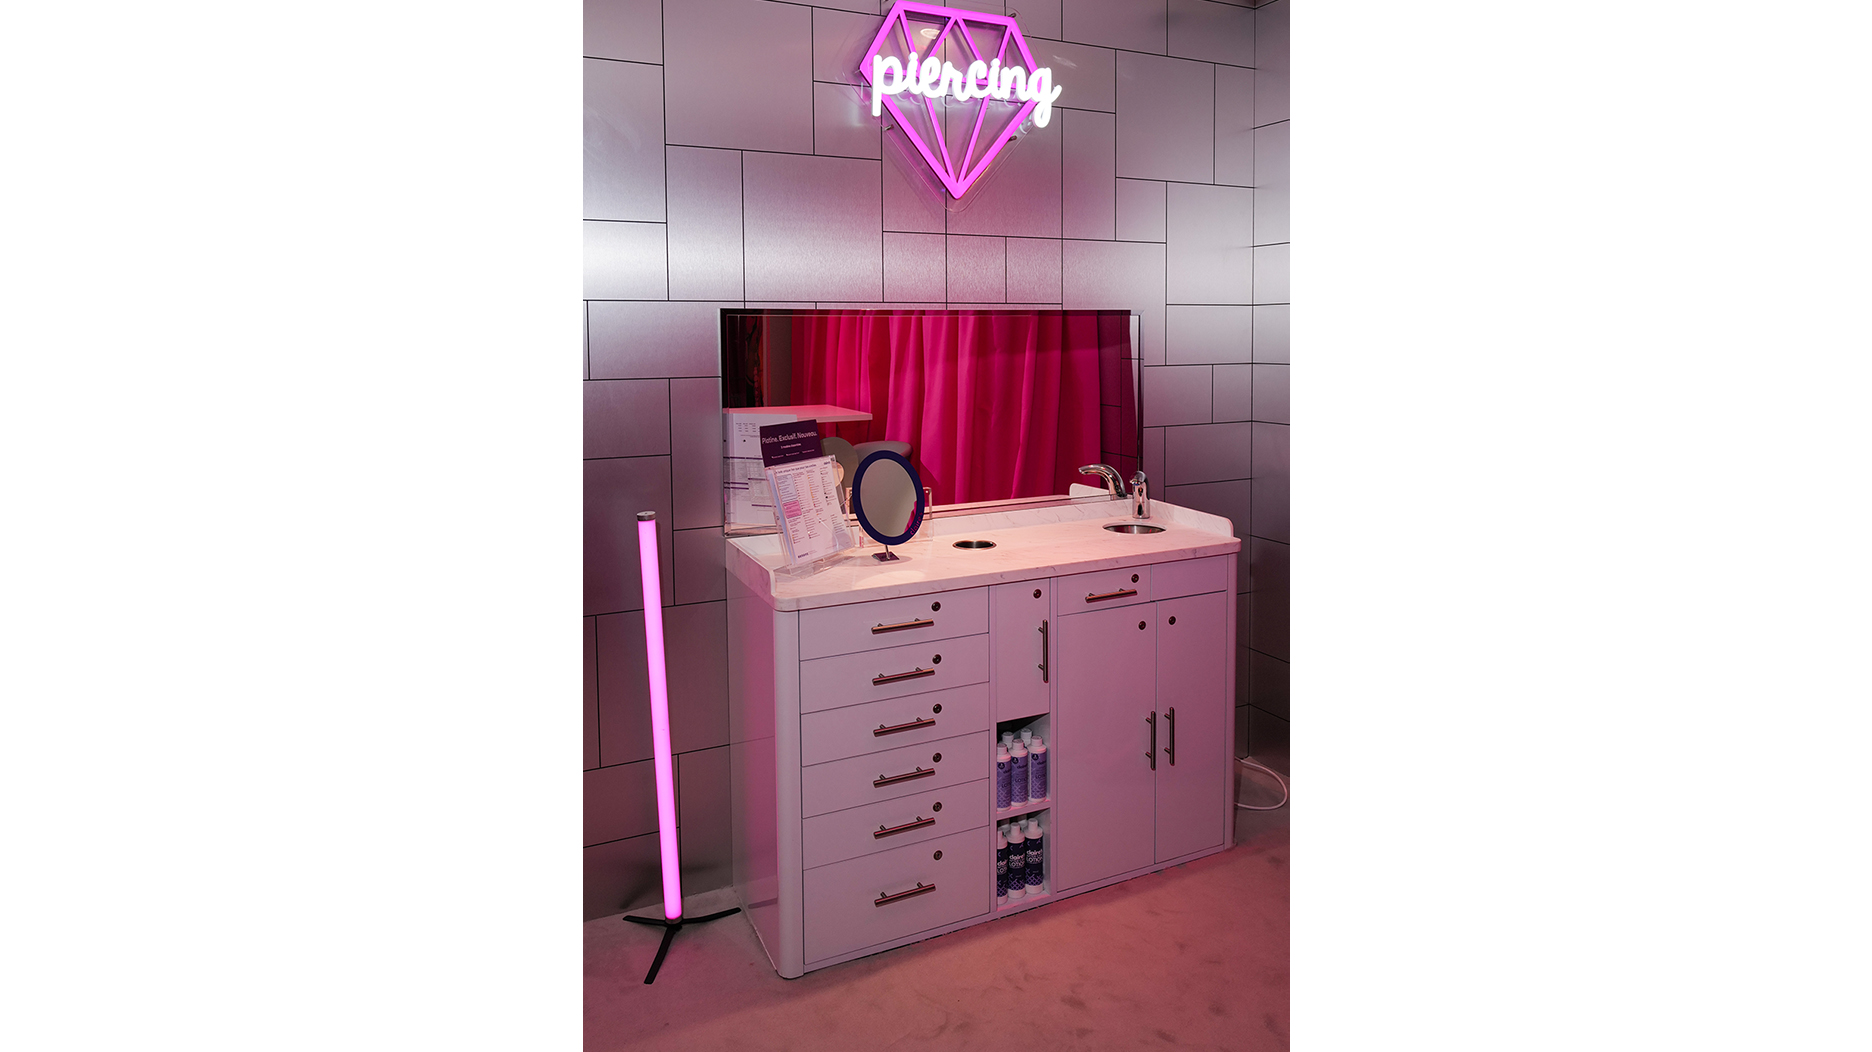 Claire's opens new immersive store in Paris